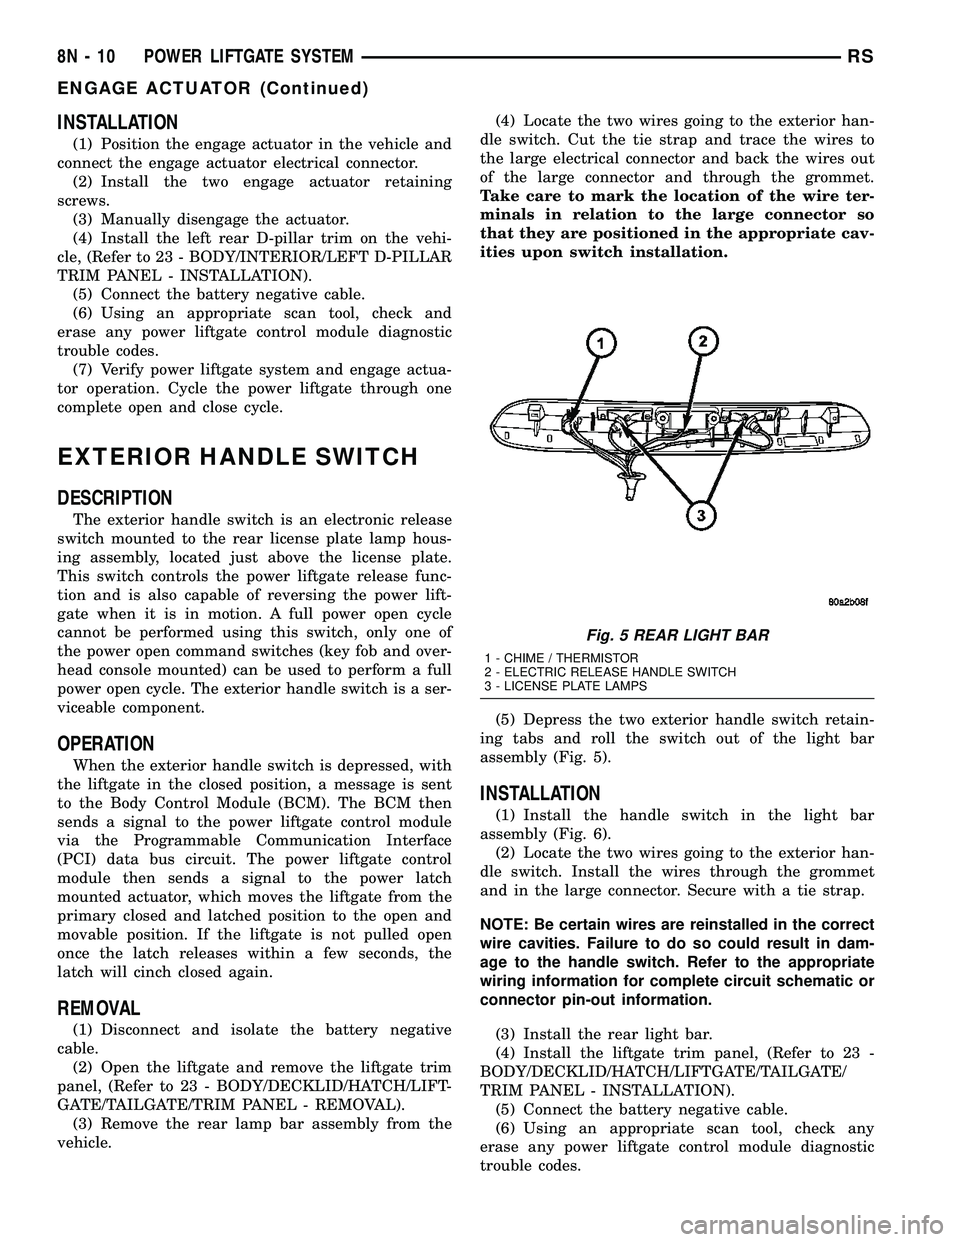 CHRYSLER VOYAGER 2005  Service Manual INSTALLATION
(1) Position the engage actuator in the vehicle and
connect the engage actuator electrical connector.
(2) Install the two engage actuator retaining
screws.
(3) Manually disengage the actu